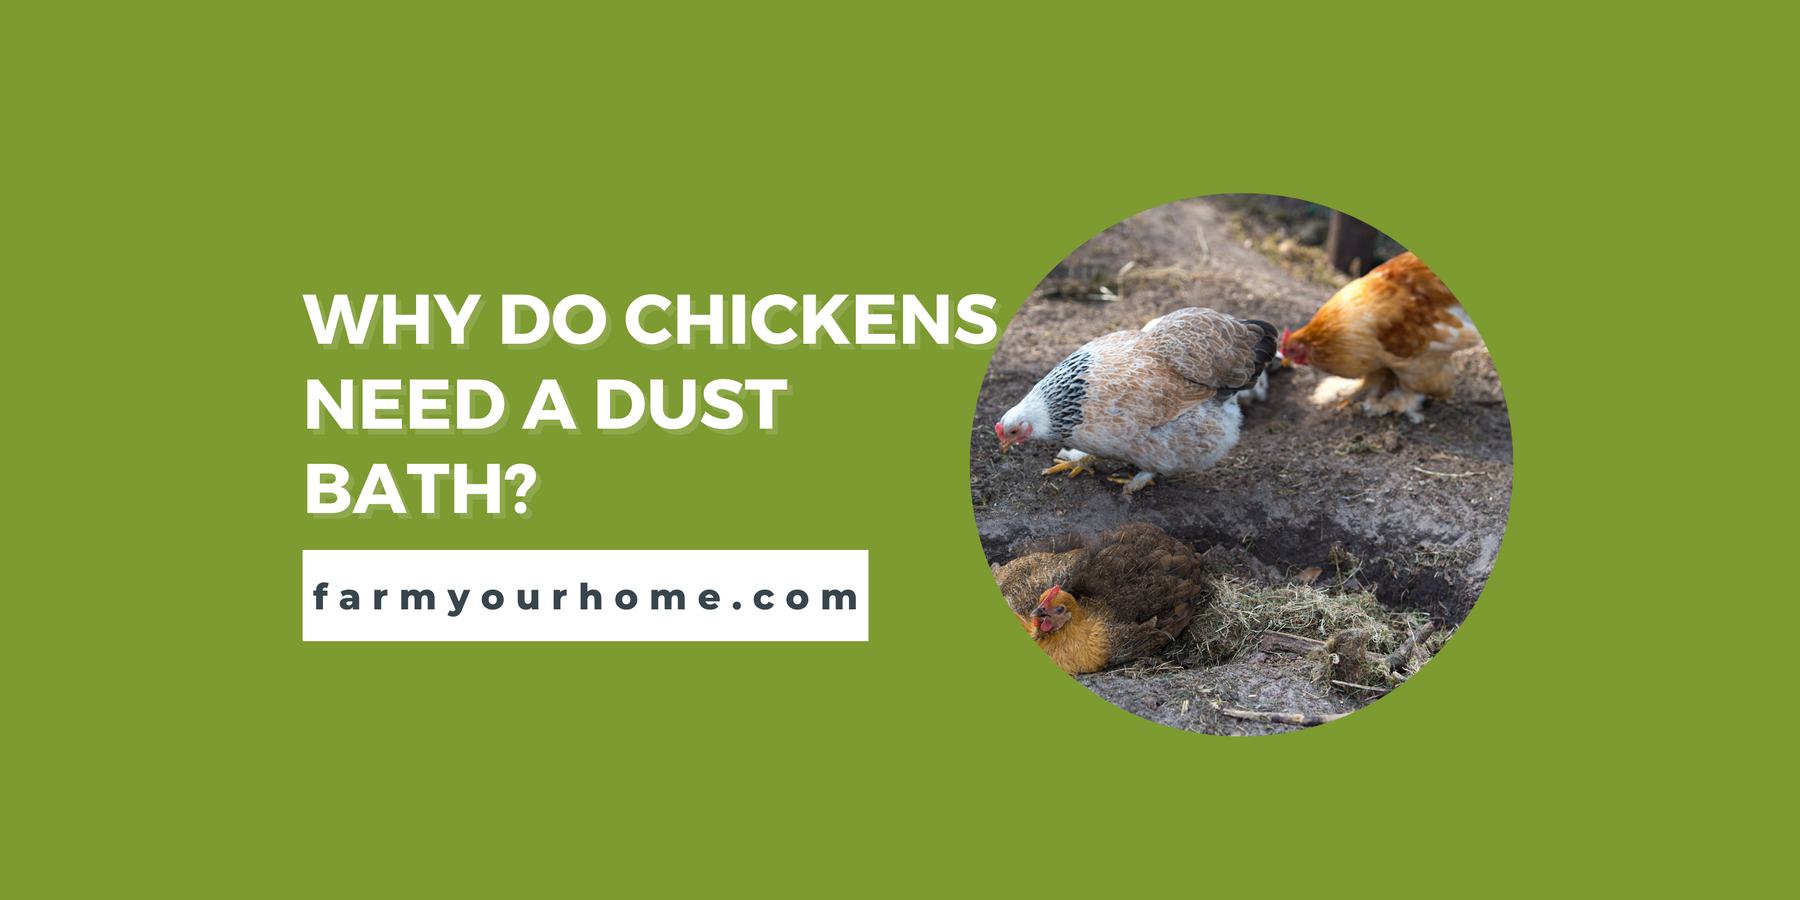 Why Do Chickens Need a Dust Bath?